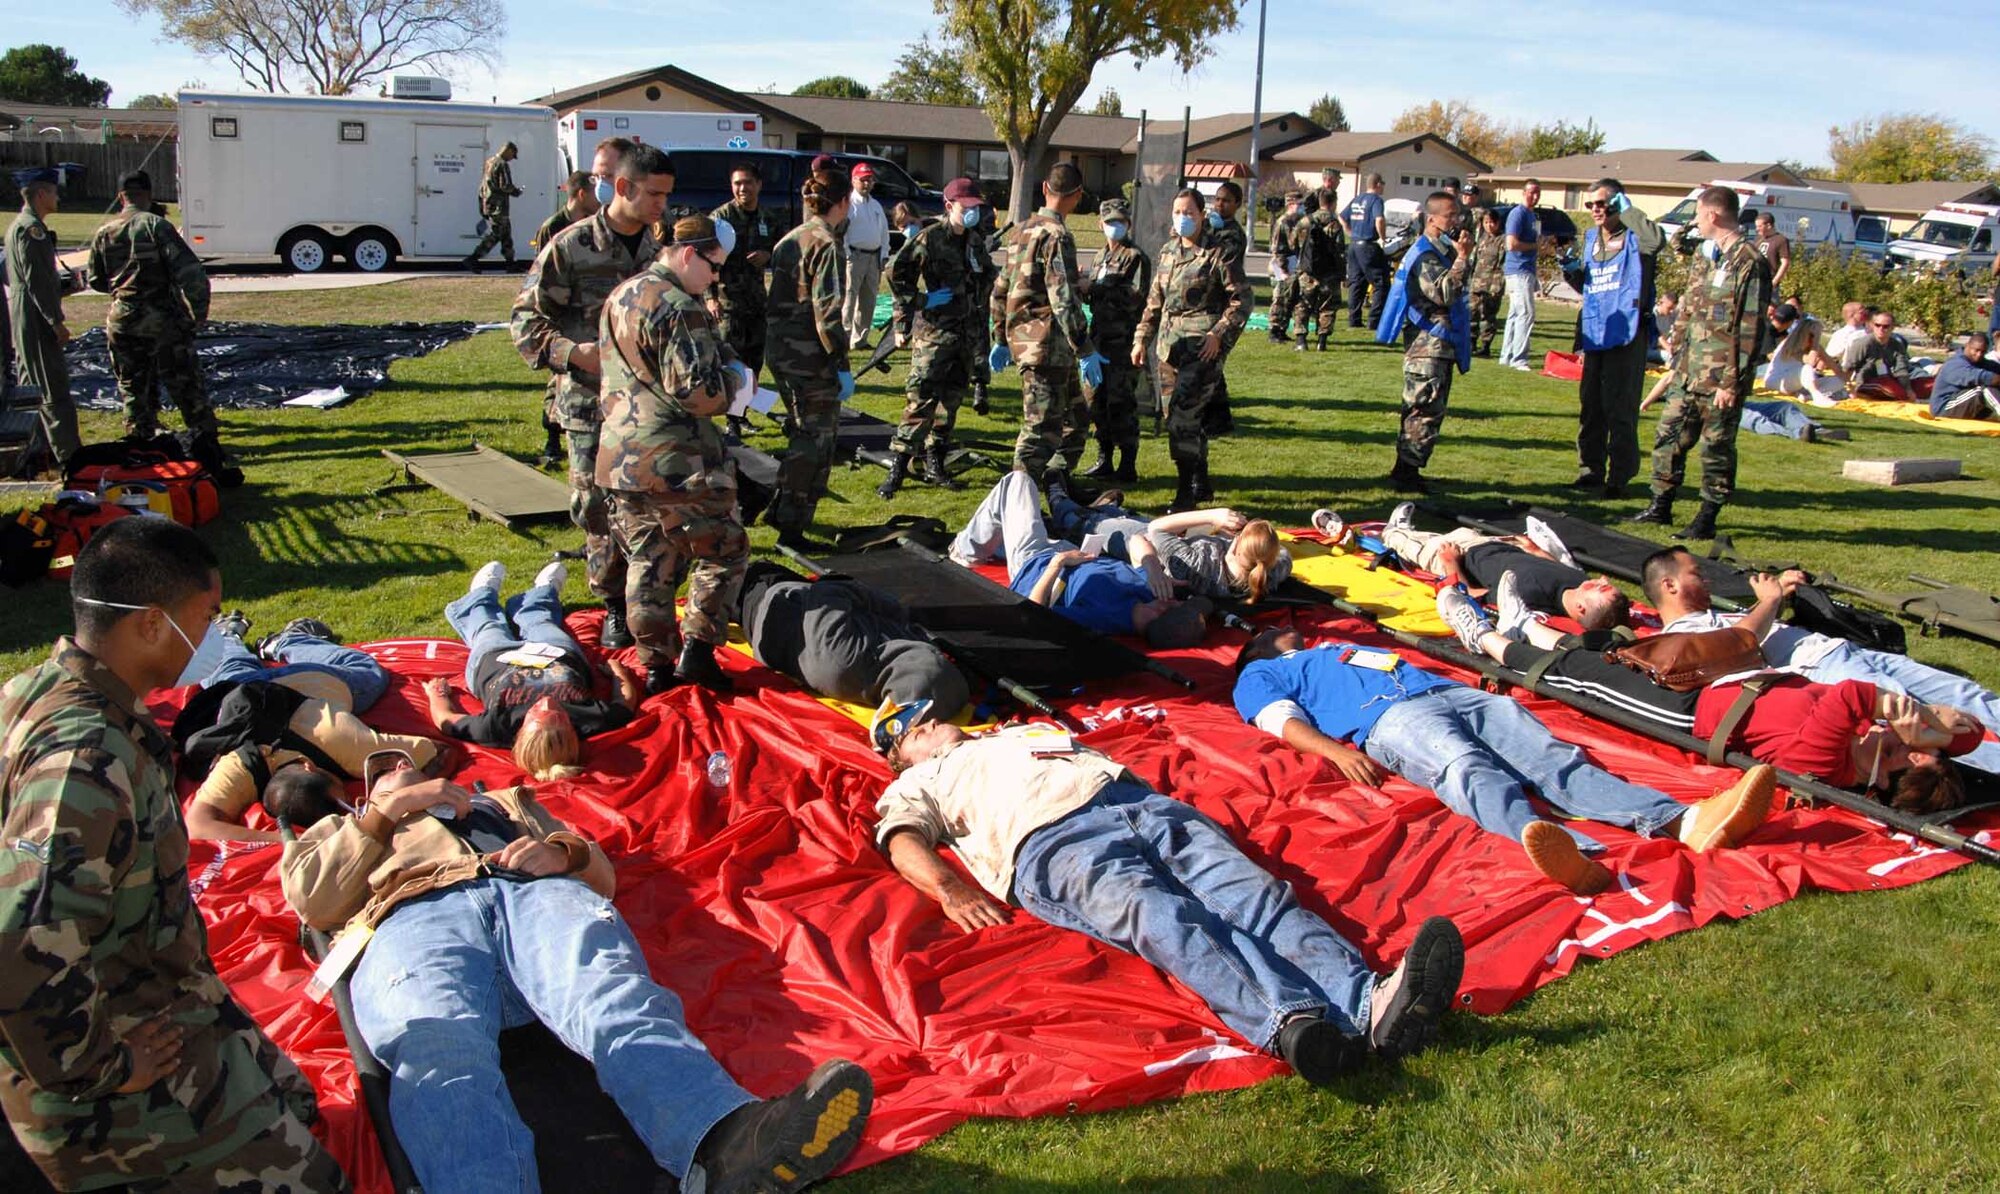 Emergency medical staff treat “patients” at the emergency triage station near the Base Theater during the Home Station Attack Response Exercise Nov. 14. Medical staff simulated transferring “patients” to David Grant USAF Medical Center and various other hospitals. (U.S. Air Force photo)